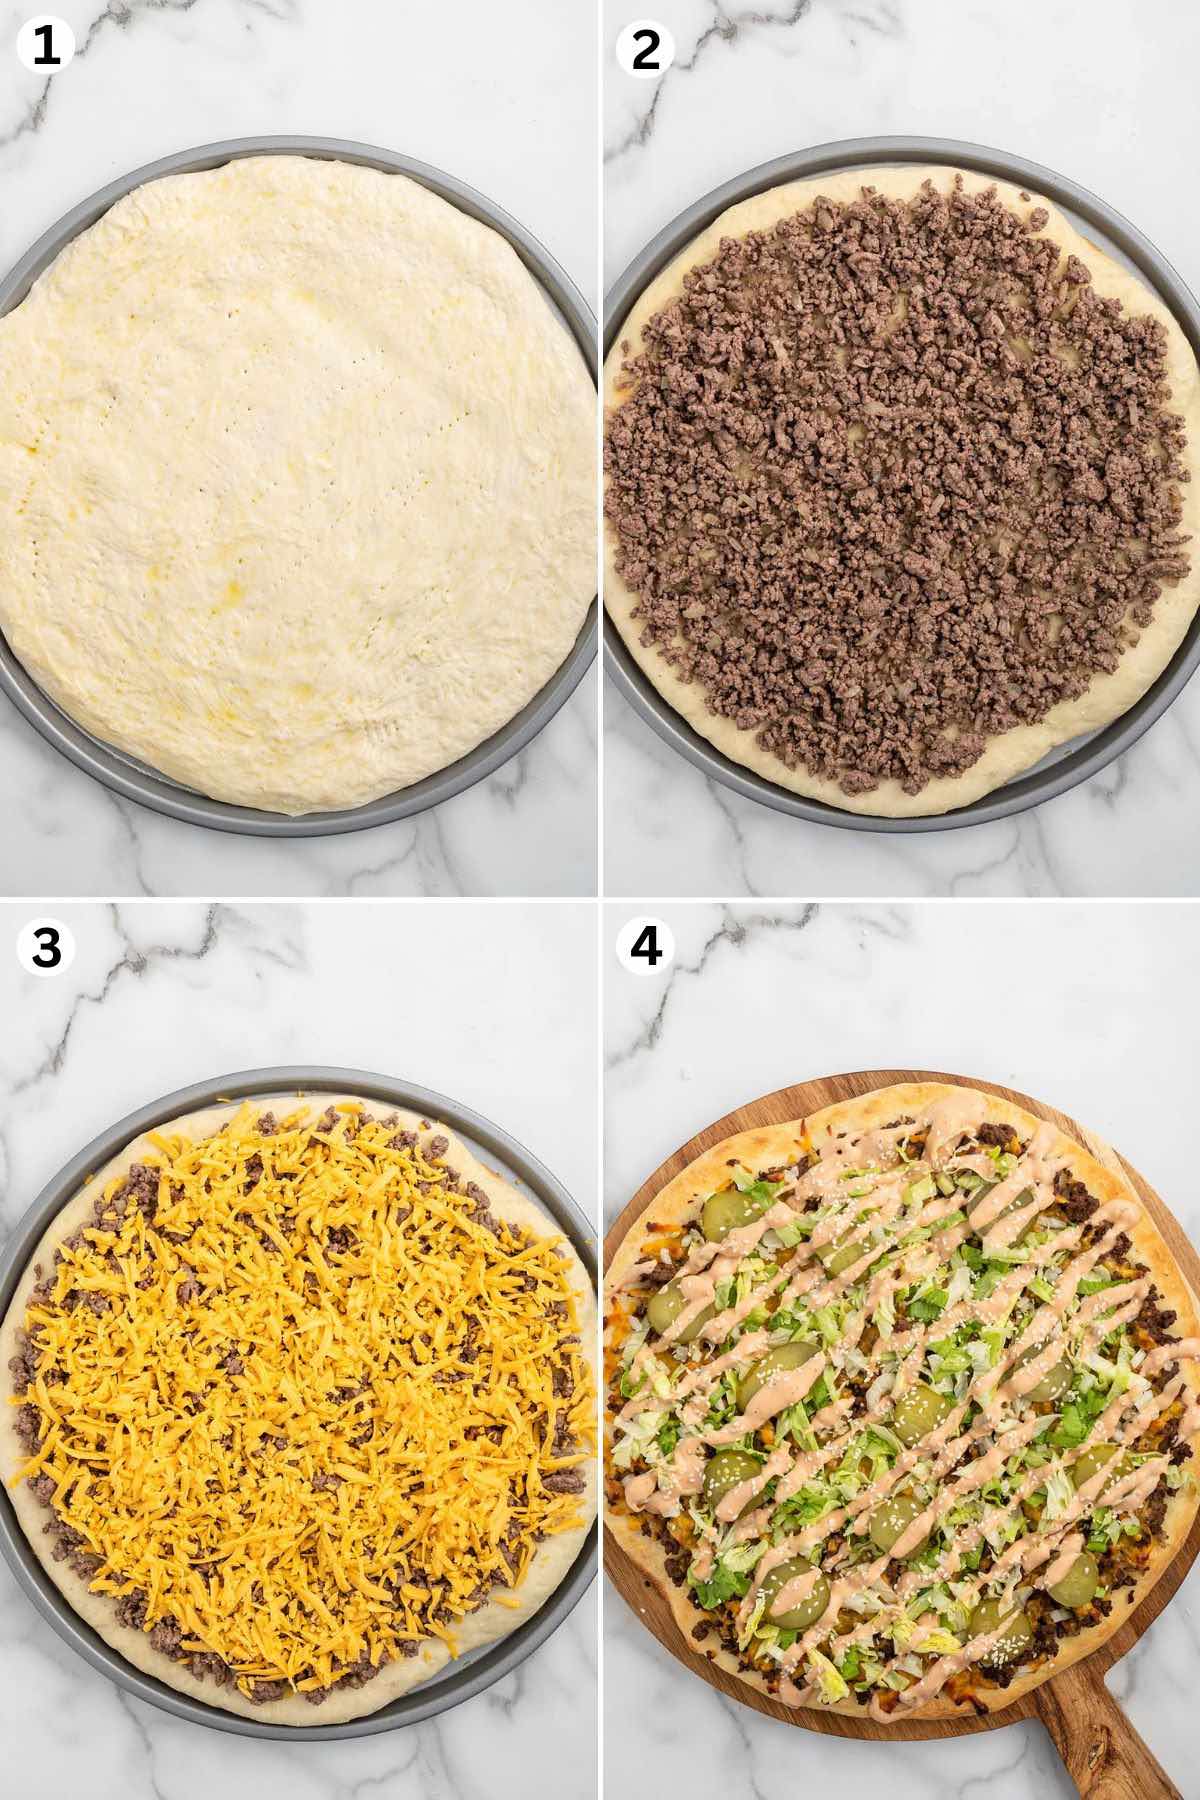 step 1. Poke holes all over the entire surface of the pizza dough then bake.
step 2. Spoon the ground beef mixture onto the par-baked pizza dough.
step 3. Top with cheese then bake.
step 4. Sprinkle shredded iceberg lettuce, diced onion, dill pickle and drizzle the Thousand Island dressing over the entire pizza.